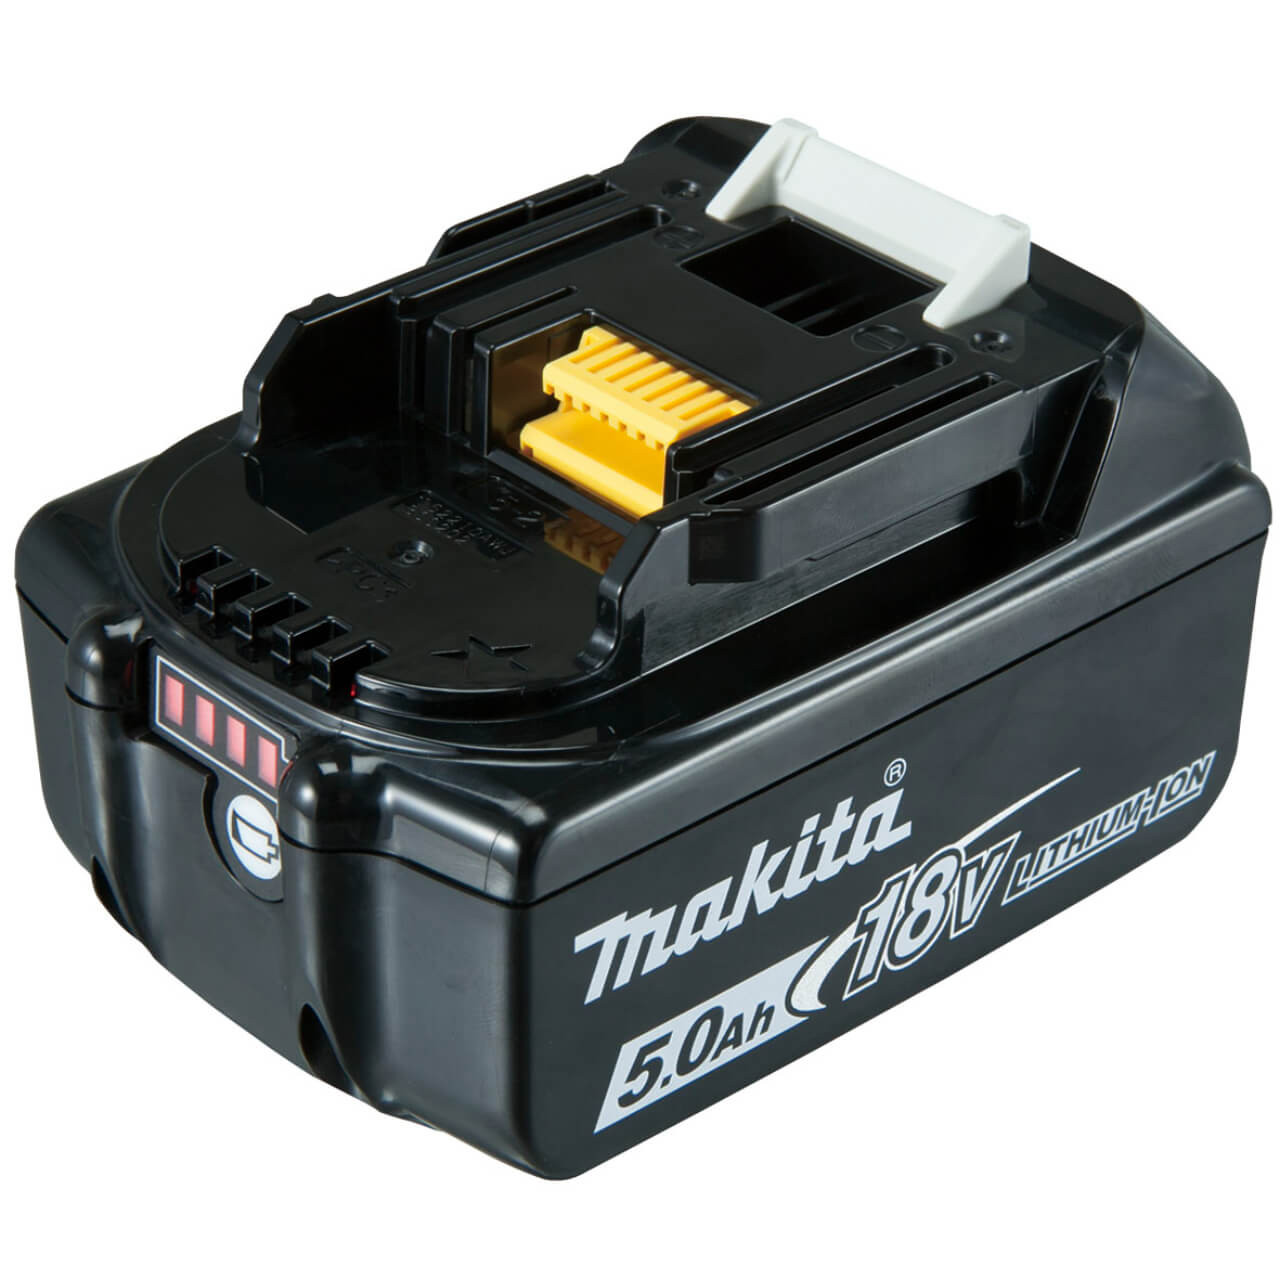 Makita 18Vx2 BRUSHLESS 165mm Plunge Saw Kit - Includes 2 x 5.0Ah Batteries. Dual Port Rapid Charger & 2 x MakPac Case